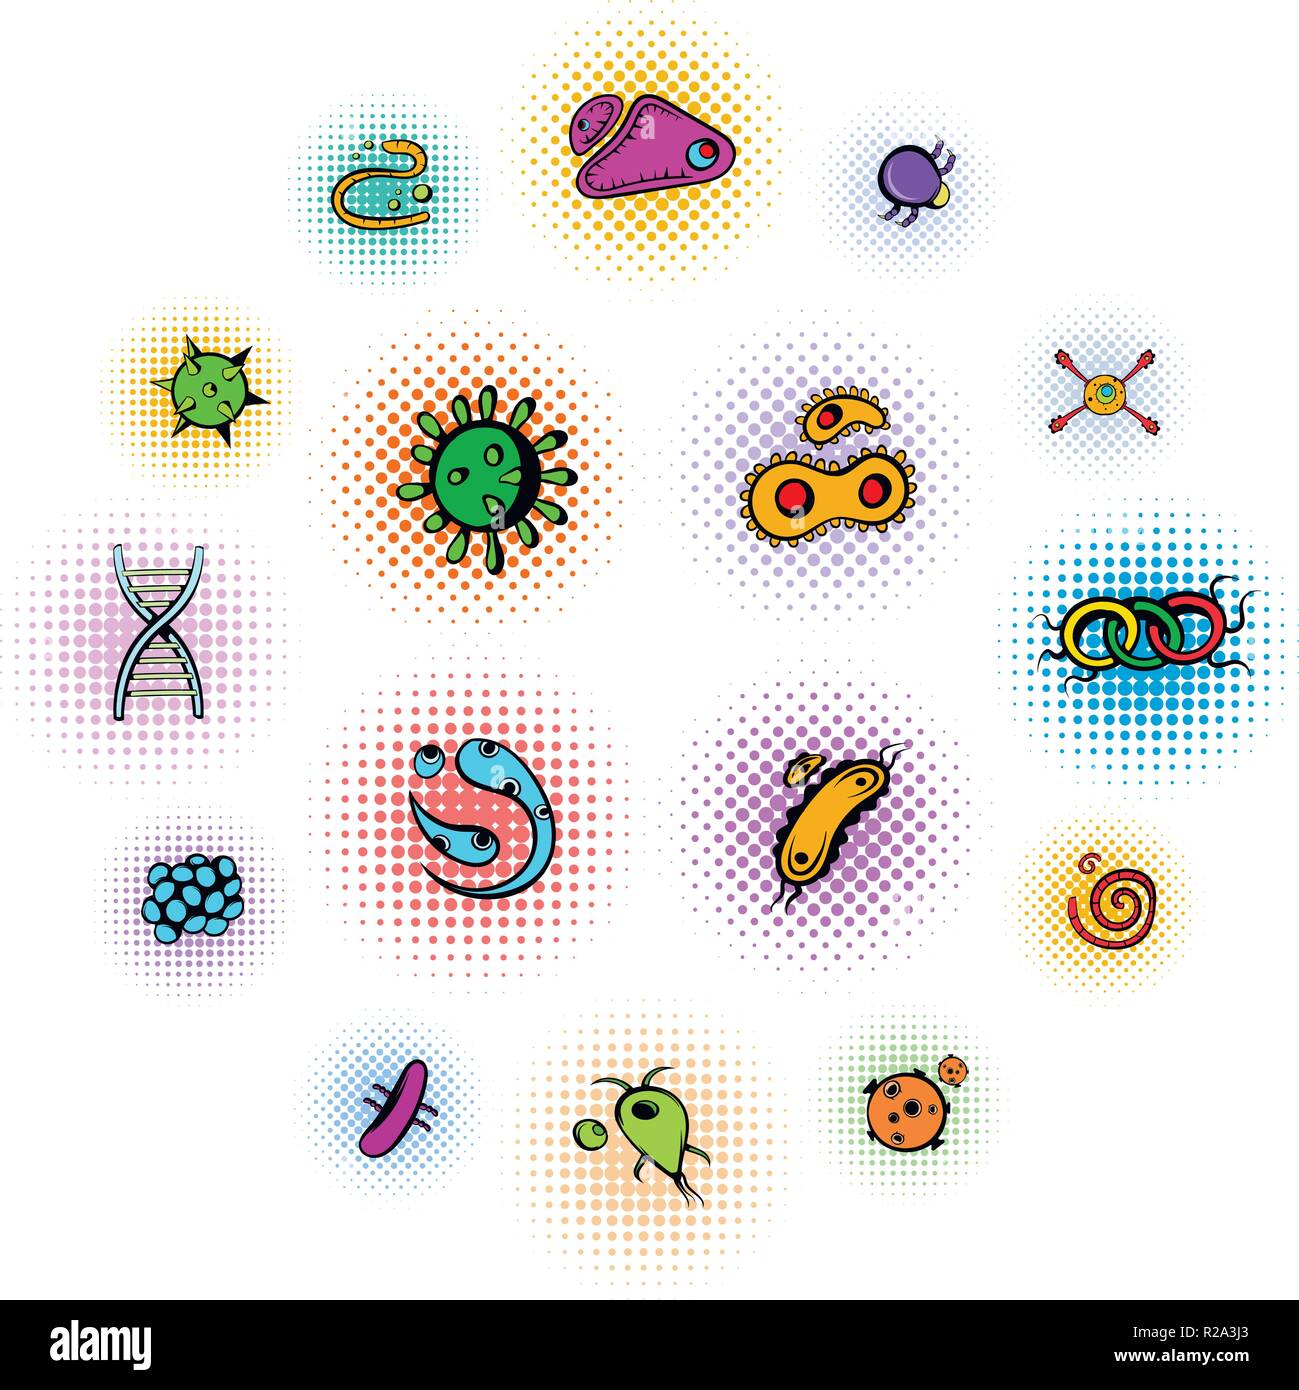 Virus icons set in comics style isolated on white background Stock Vector